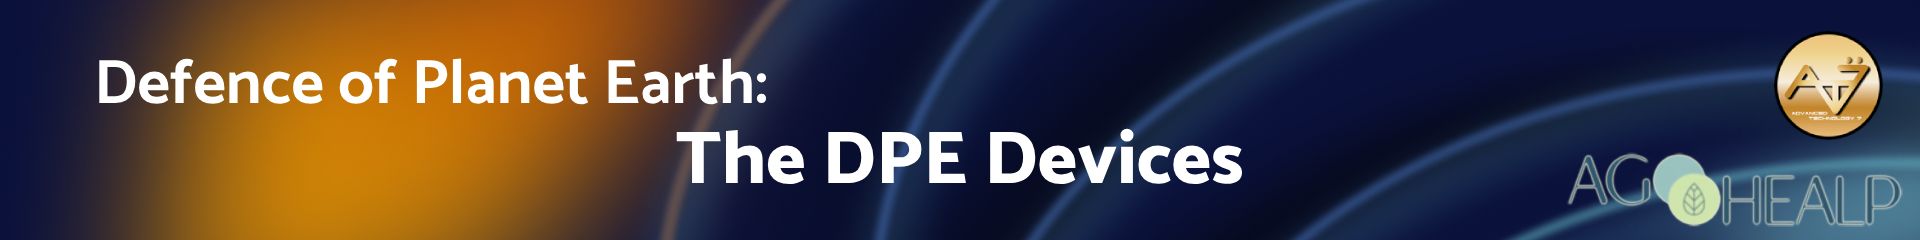 DPE Environment Protection Enhancements System